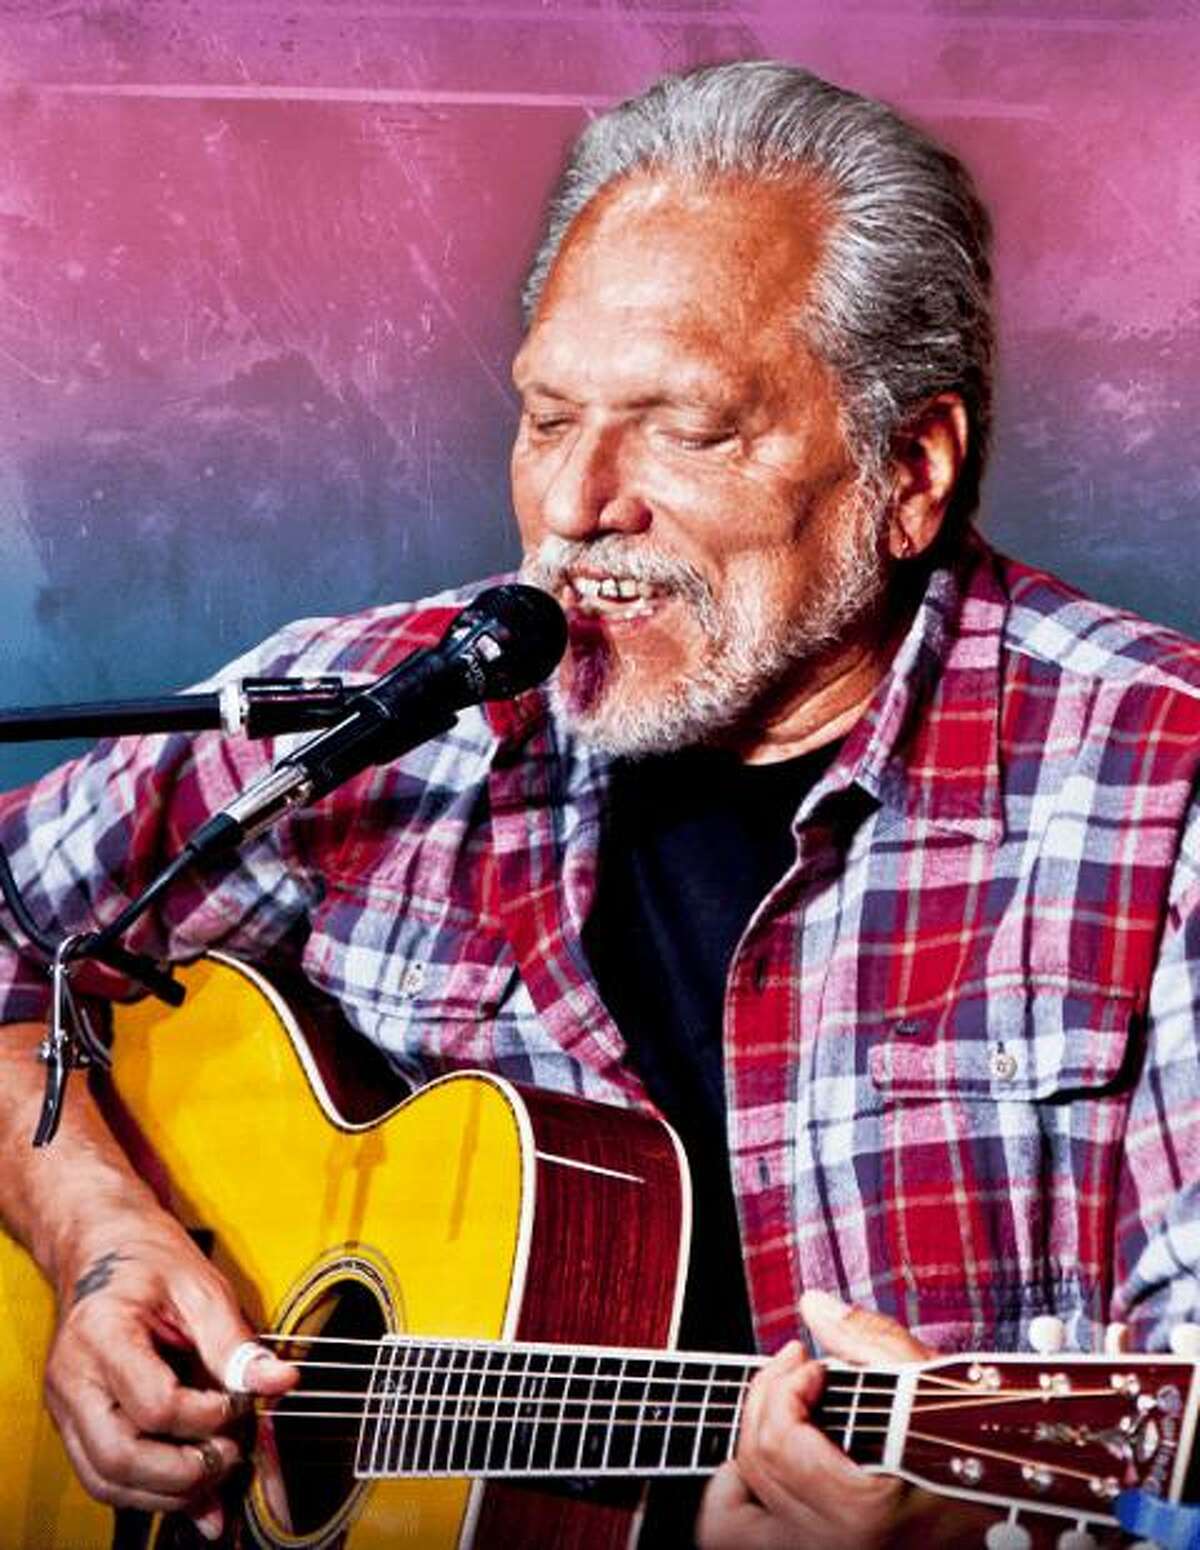 Fan favorite Jorma Kaukonen returns to the Ridgefield Playhouse Tent for July 18 for two shows at 4 p.m. and 7:30 p.m.